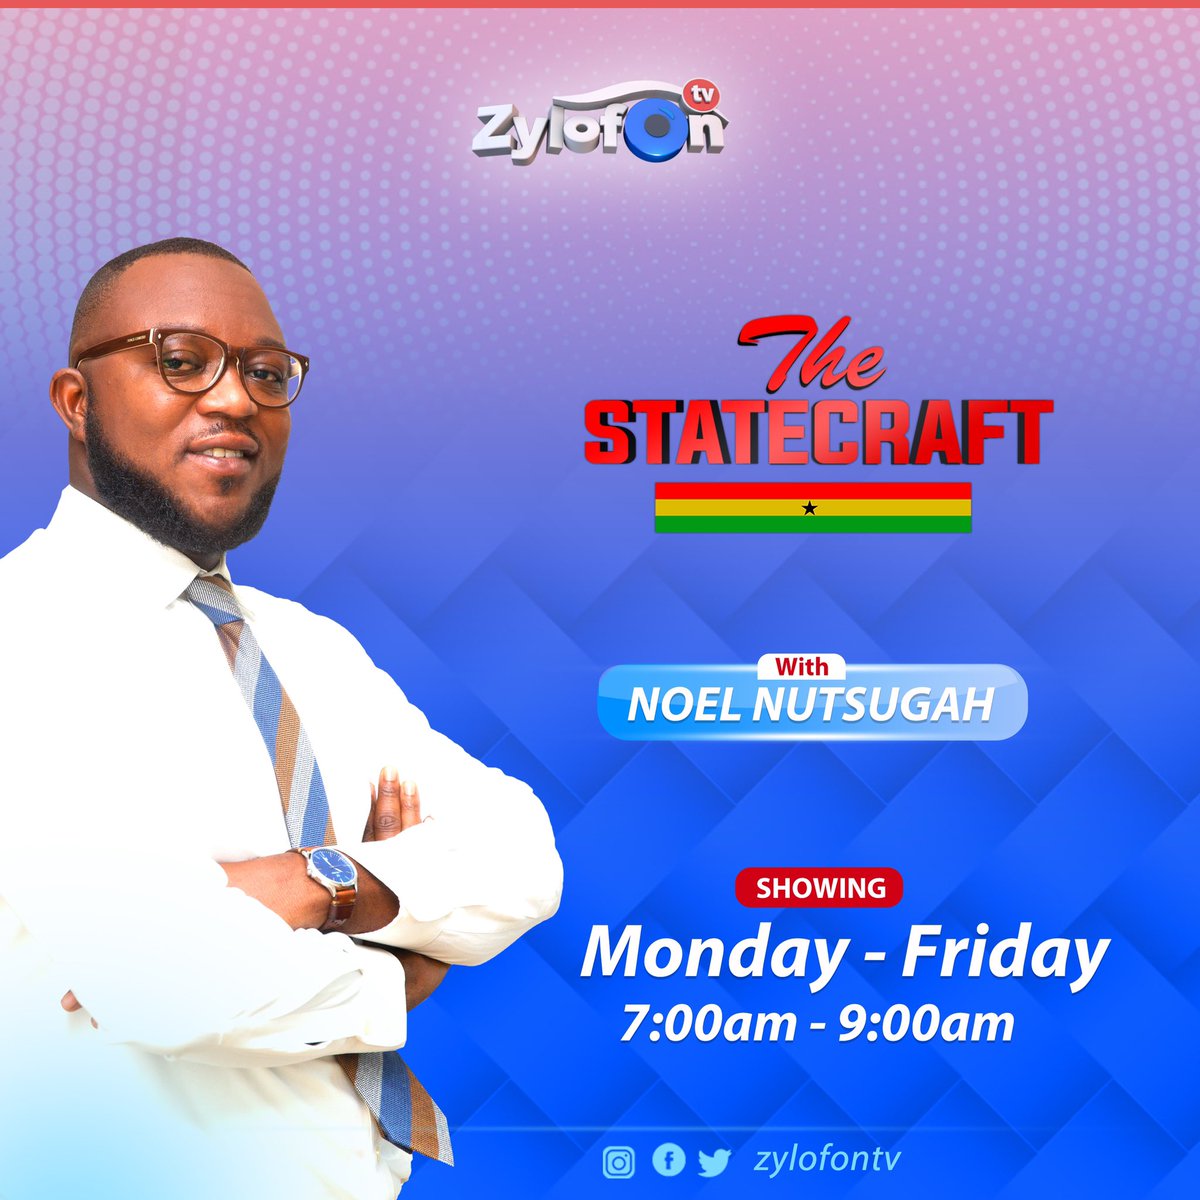 Stay tuned in to @ZylofonTv and @zylofon1021fm #TheStatecraft is still live on your television screens and radio with @NoelNutsugah 👌 #Zylofongroup